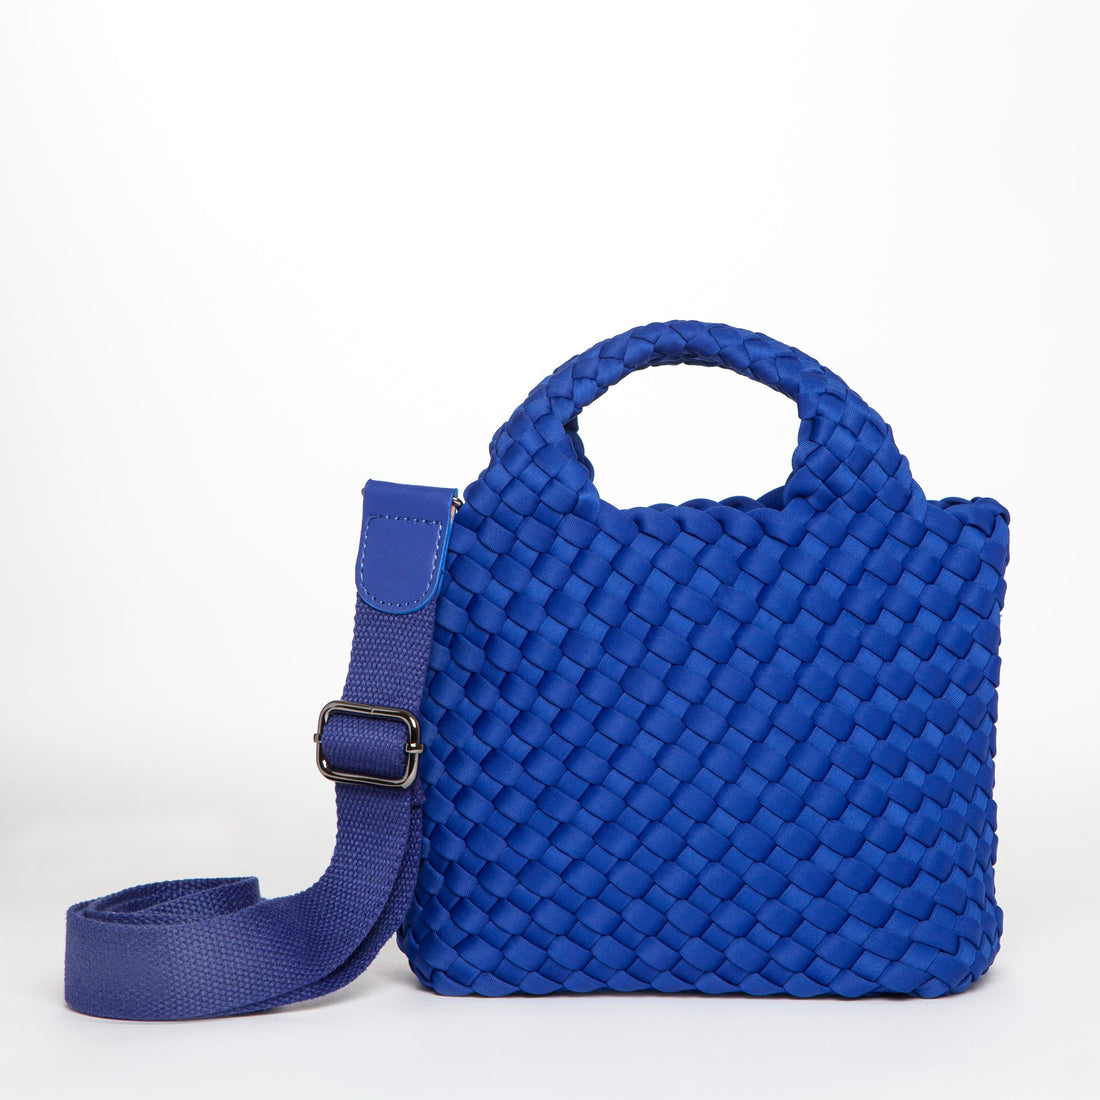 Andreina Bags Electric Neon Blue Lupe Crossbody Bag. Perfect to carry essentials. And great for wearing across your body and go. The back to go! So convenient and stylish. Designed in Australia. Blue Neon Crossbody bag.